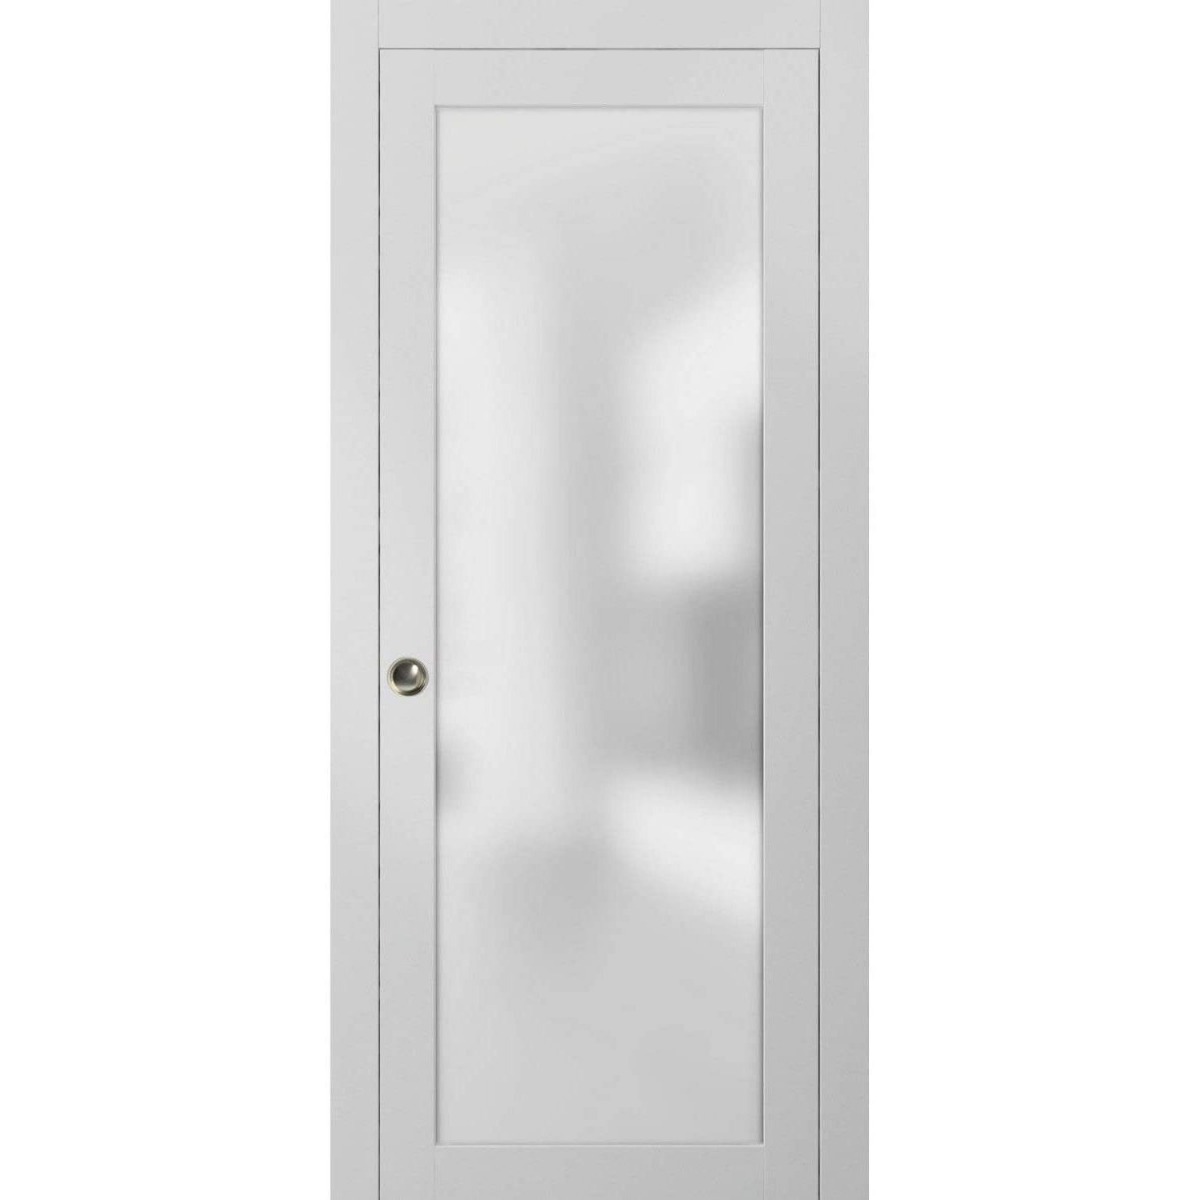 Sliding Pocket Door with Frosted Tempered Glass | Planum 2102 White Silk | Kit Trims Rail Hardware | Solid Wood Interior Bedroom Bathroom Closet Sturdy Doors